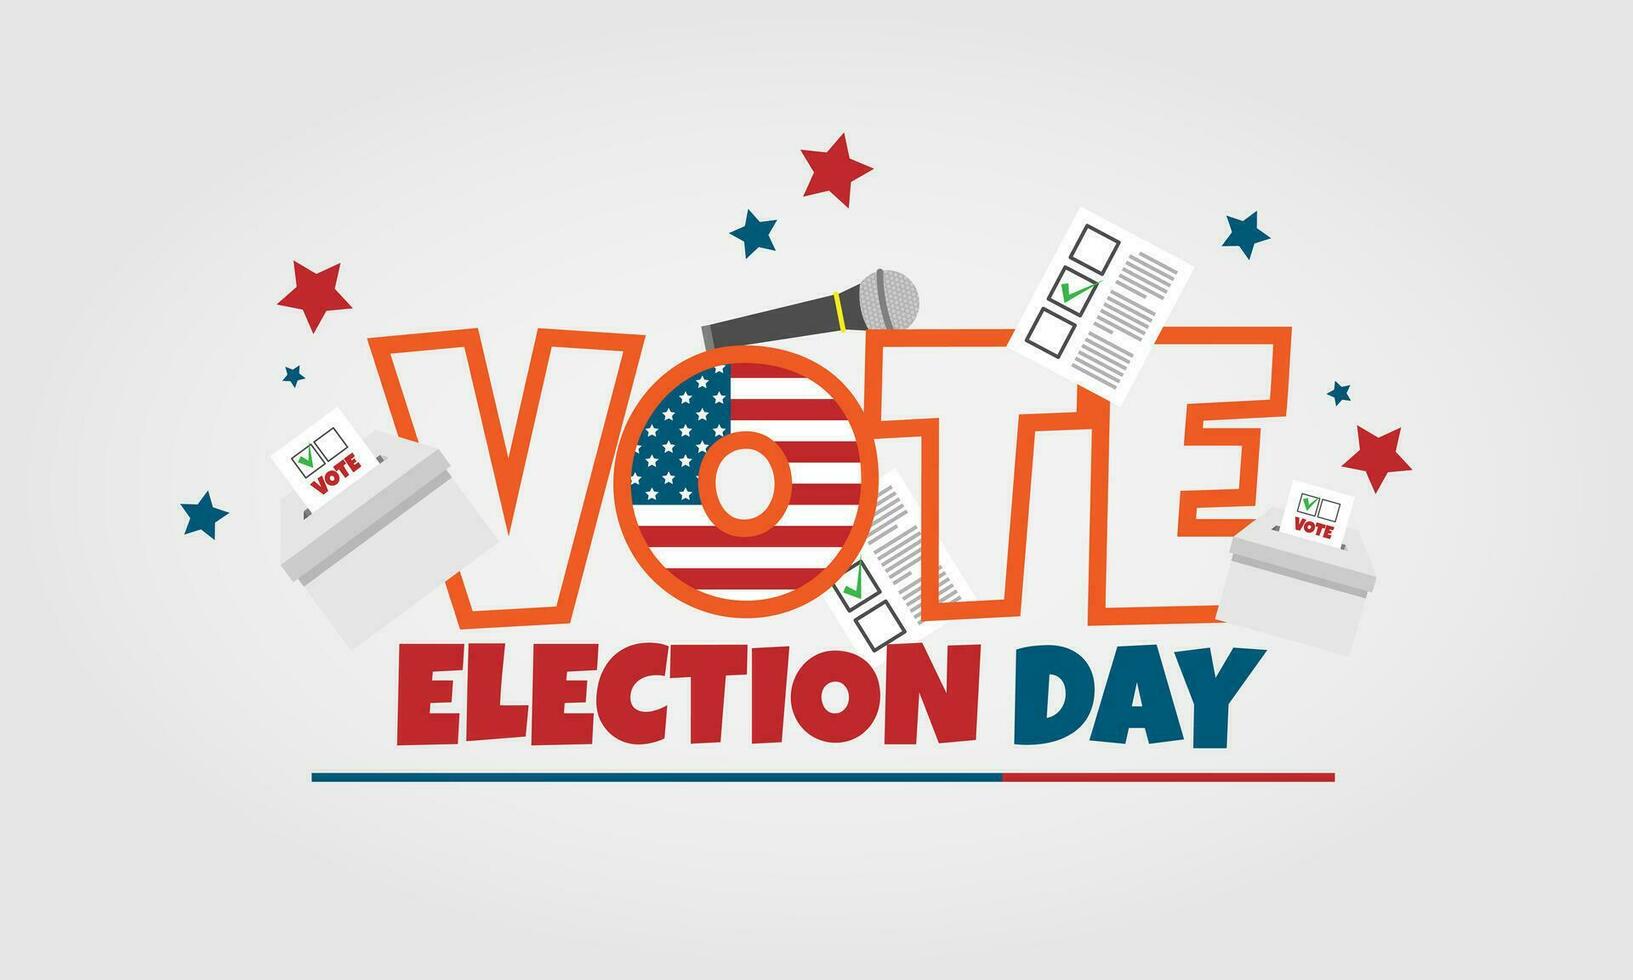 Election Day poster with election elements vector